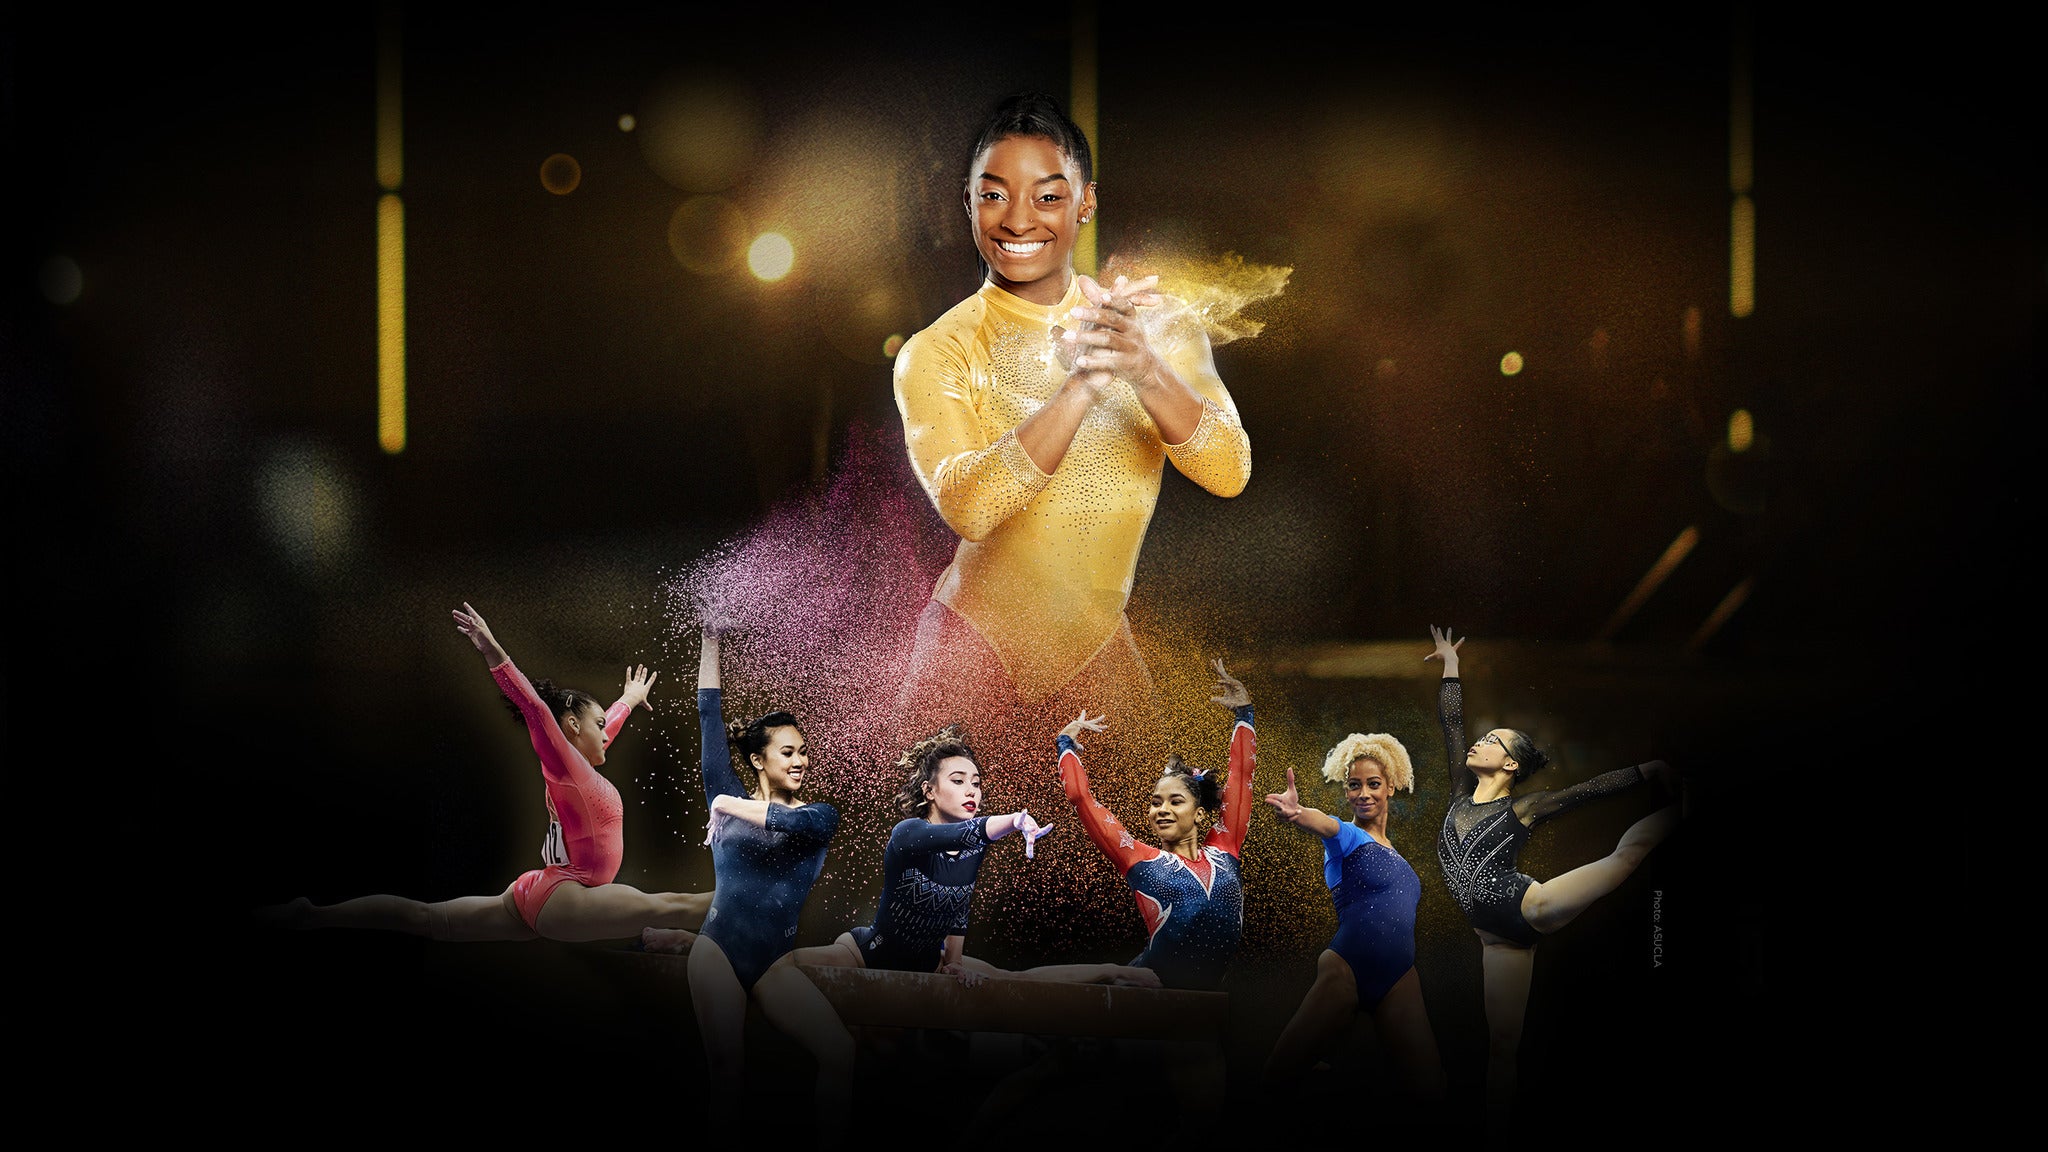 G.O.A.T. Gold Over America Tour Starring Simone Biles in Washington promo photo for Official Platinum presale offer code